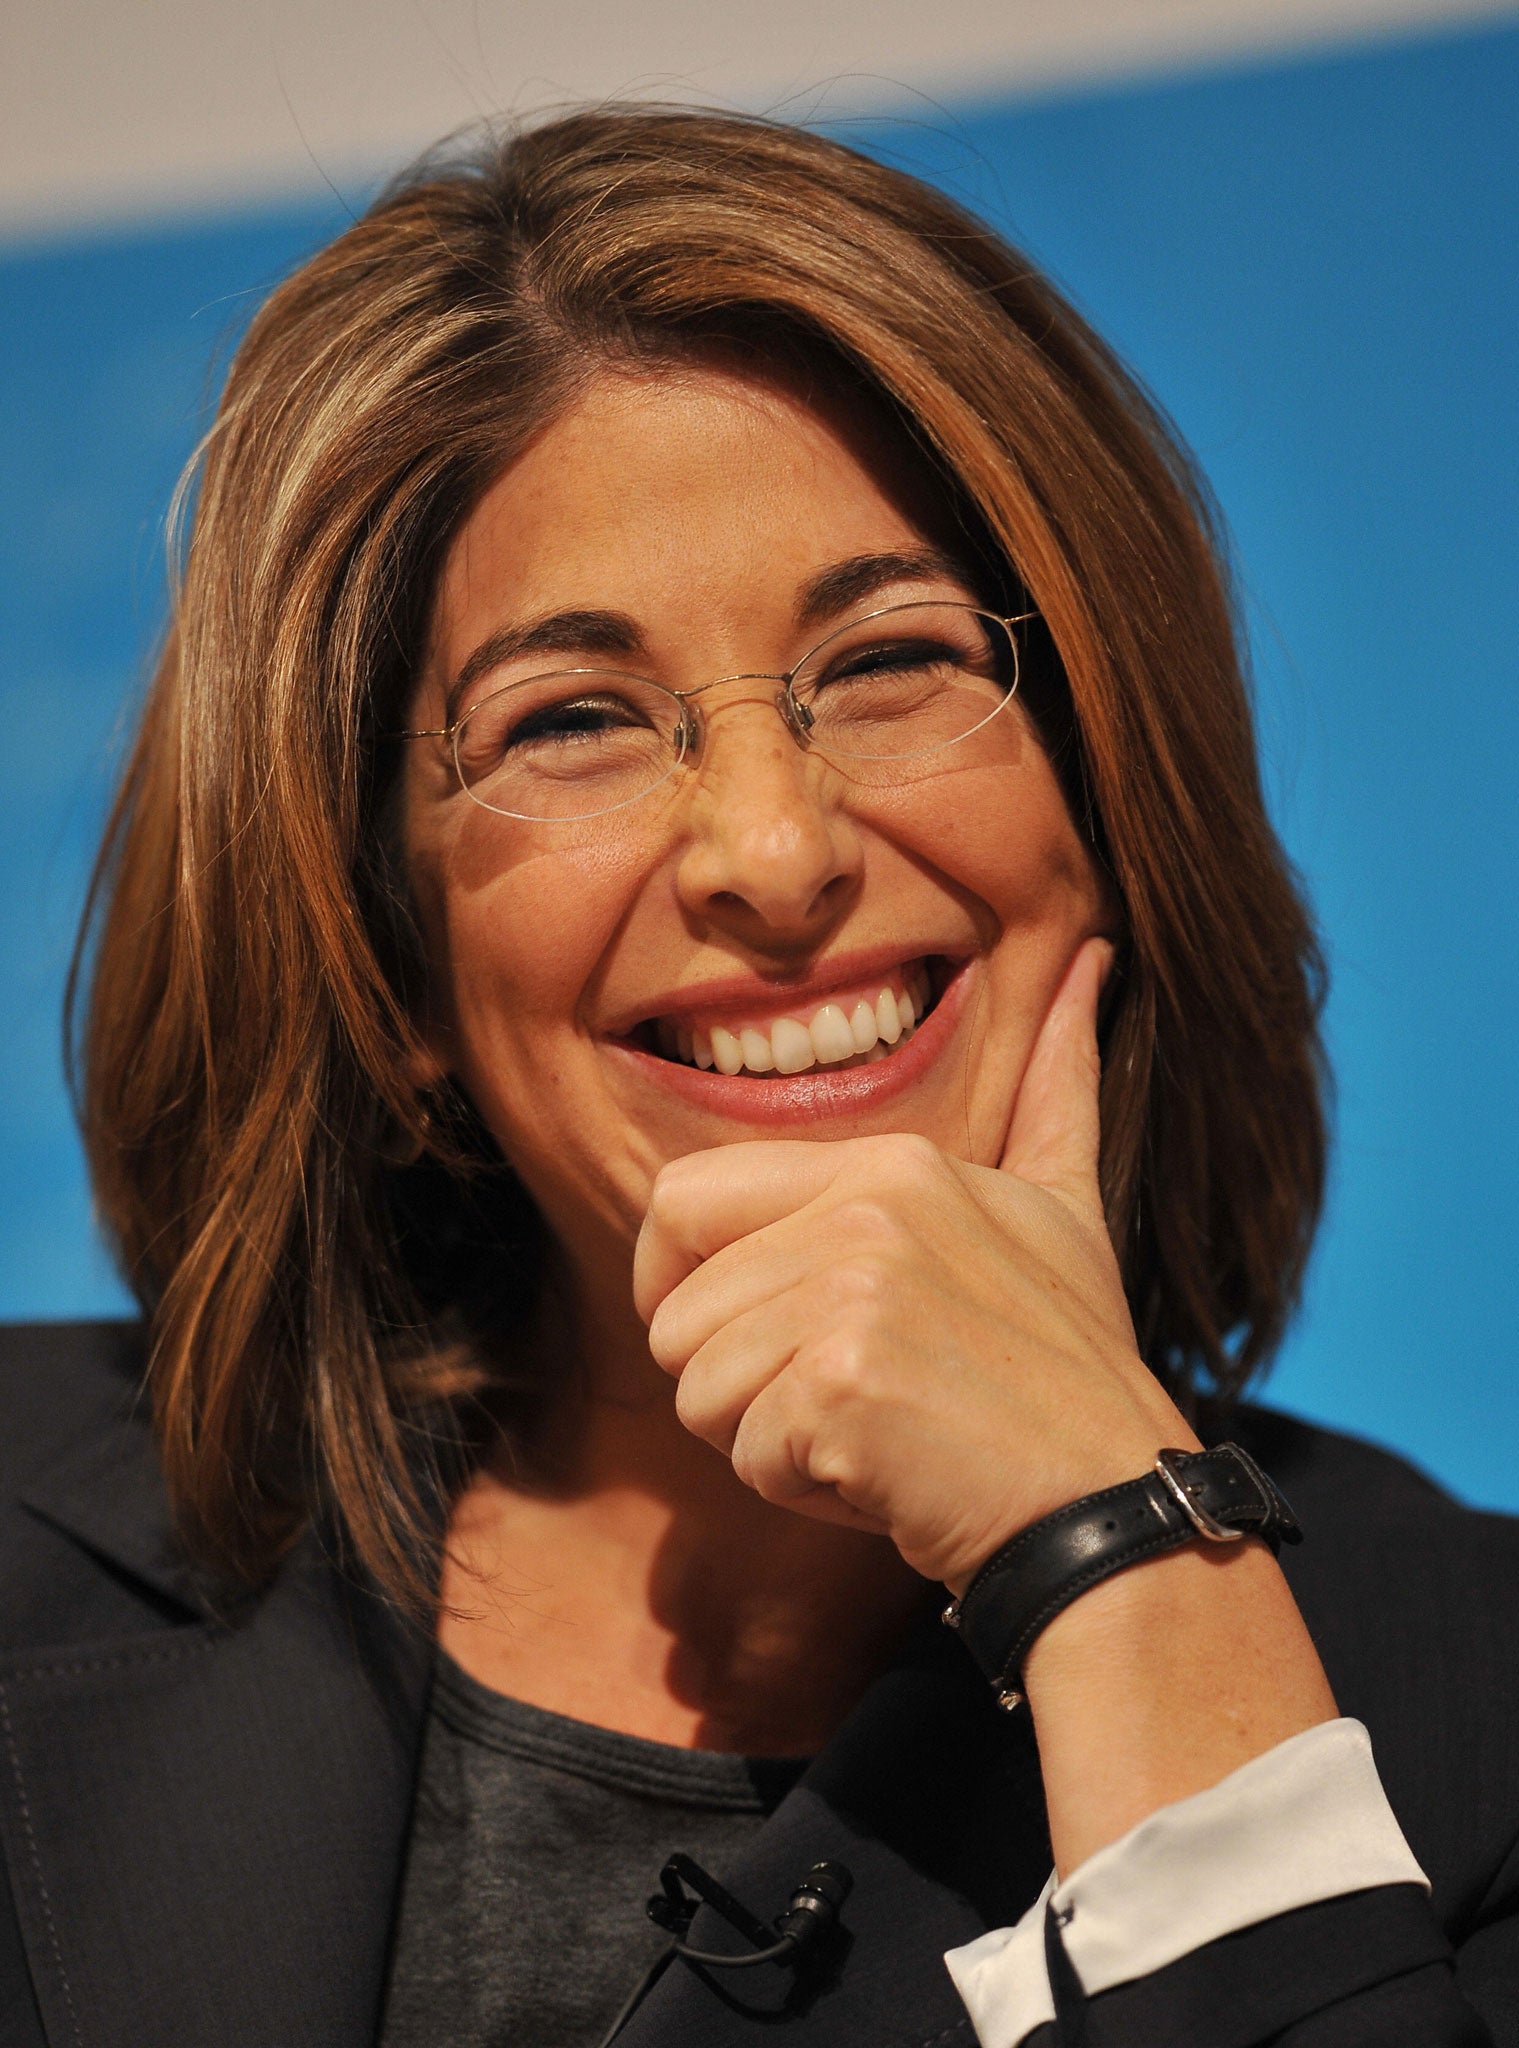 Naomi Klein interview The No Logo author and climate change activist talks compost, Cameron, and the irresistible humour of otters The Independent The Independent